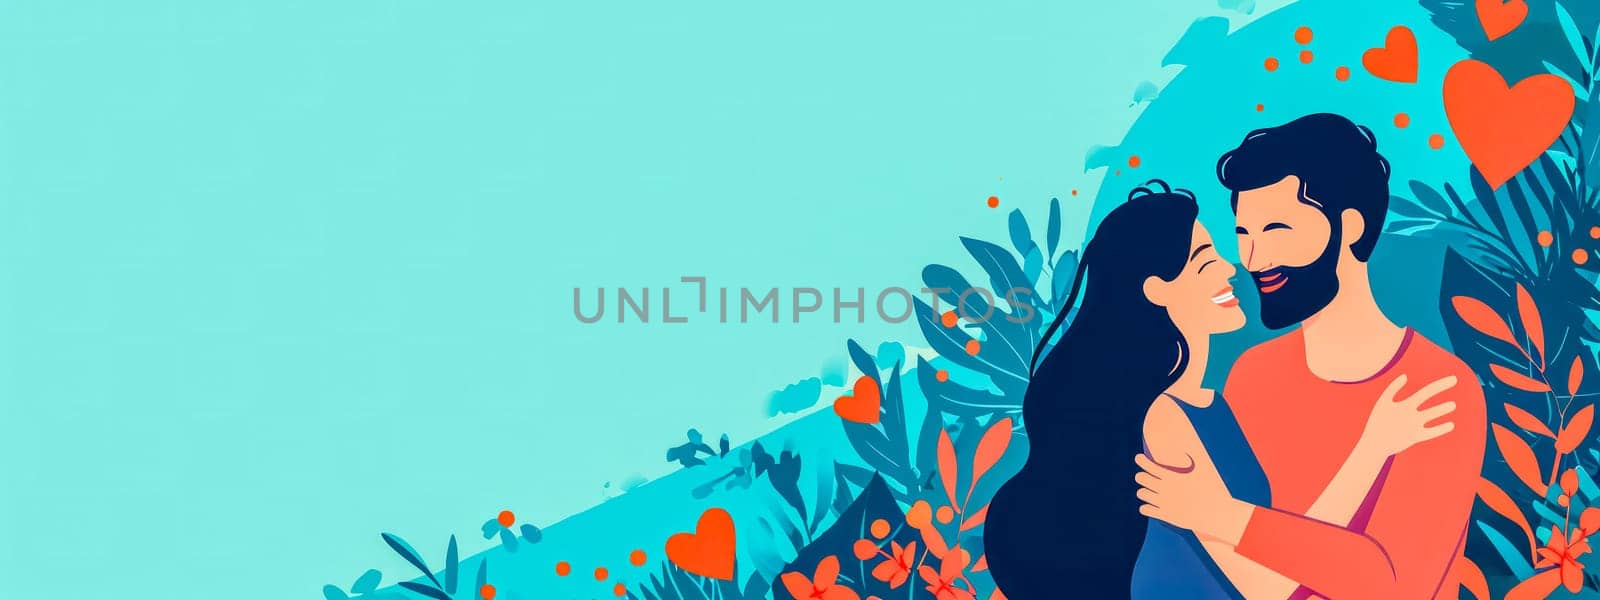 couple in a loving embrace, surrounded by plants and heart shapes against a serene blue background, evoking feelings of joy, love, and companionship, banner with copy space